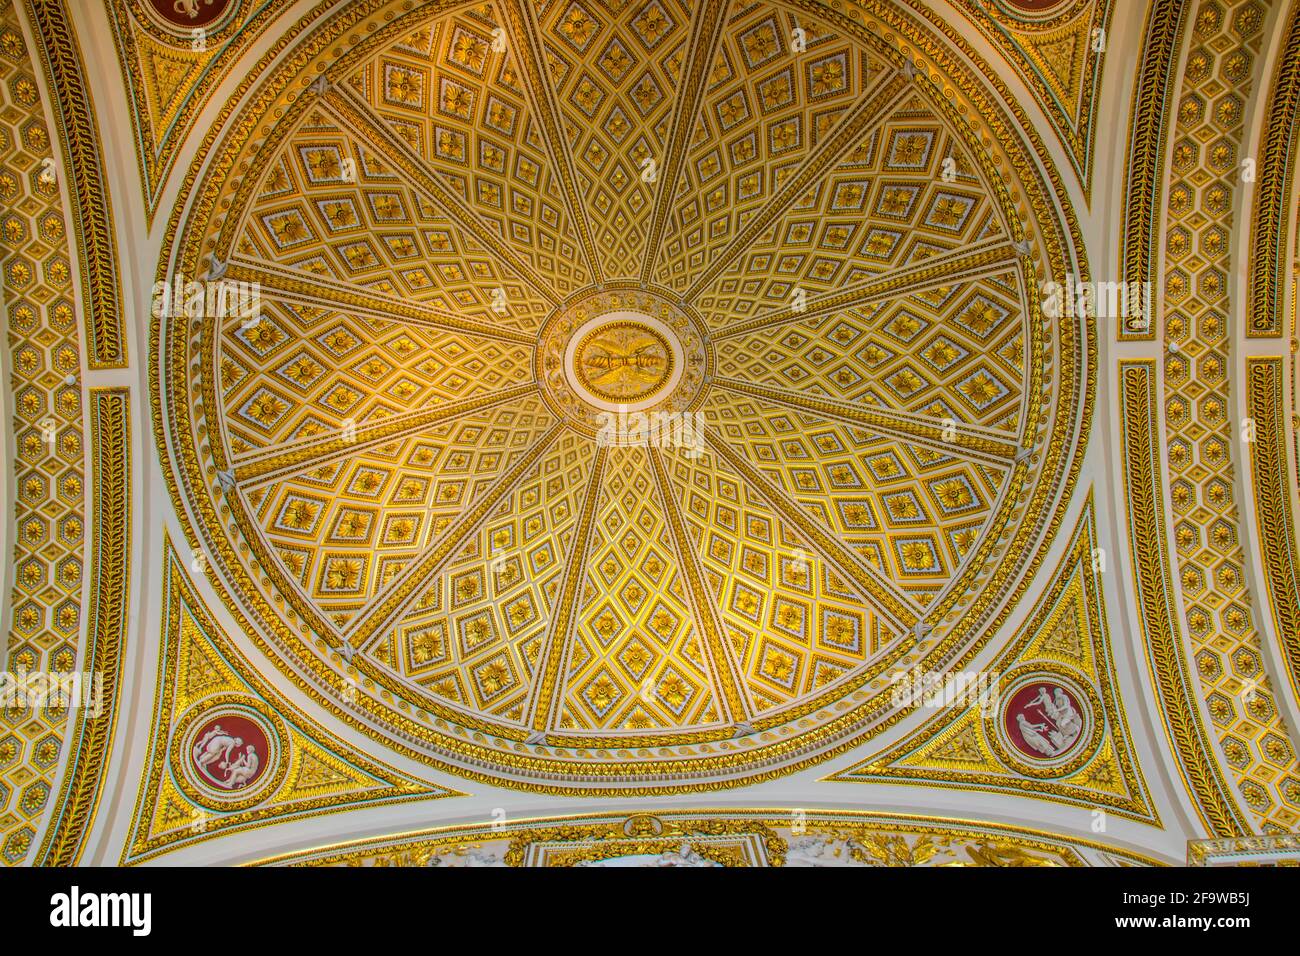 FLORENCE, ITALY, MARCH 15, 2016: Detail of ceiling of the uffizi gallery in florence Stock Photo